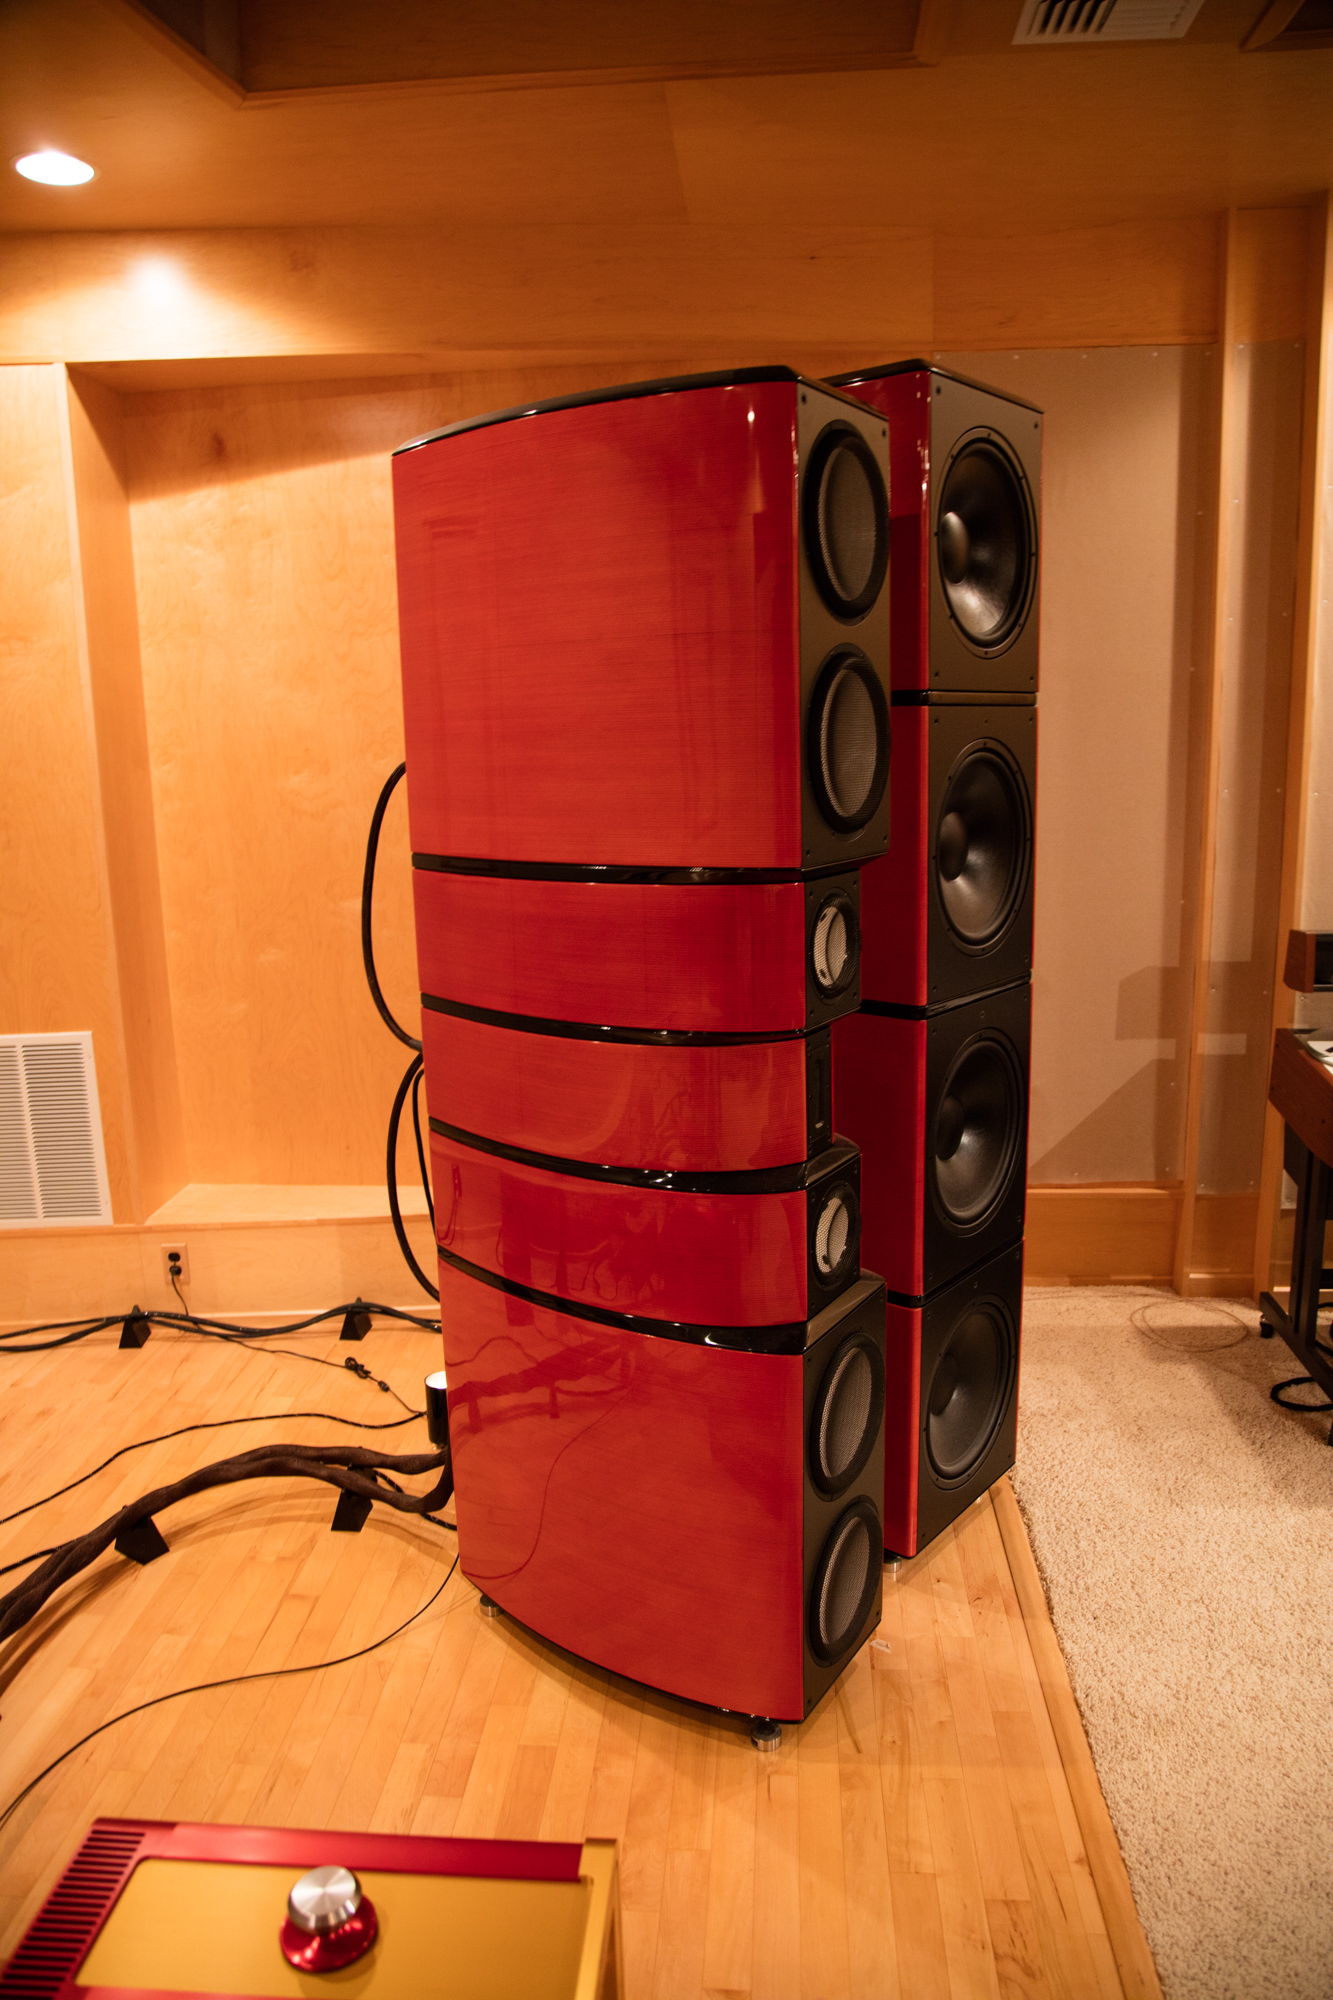 84" tall, 575 pound main towers and 87" tall, 600 pound bass towers.